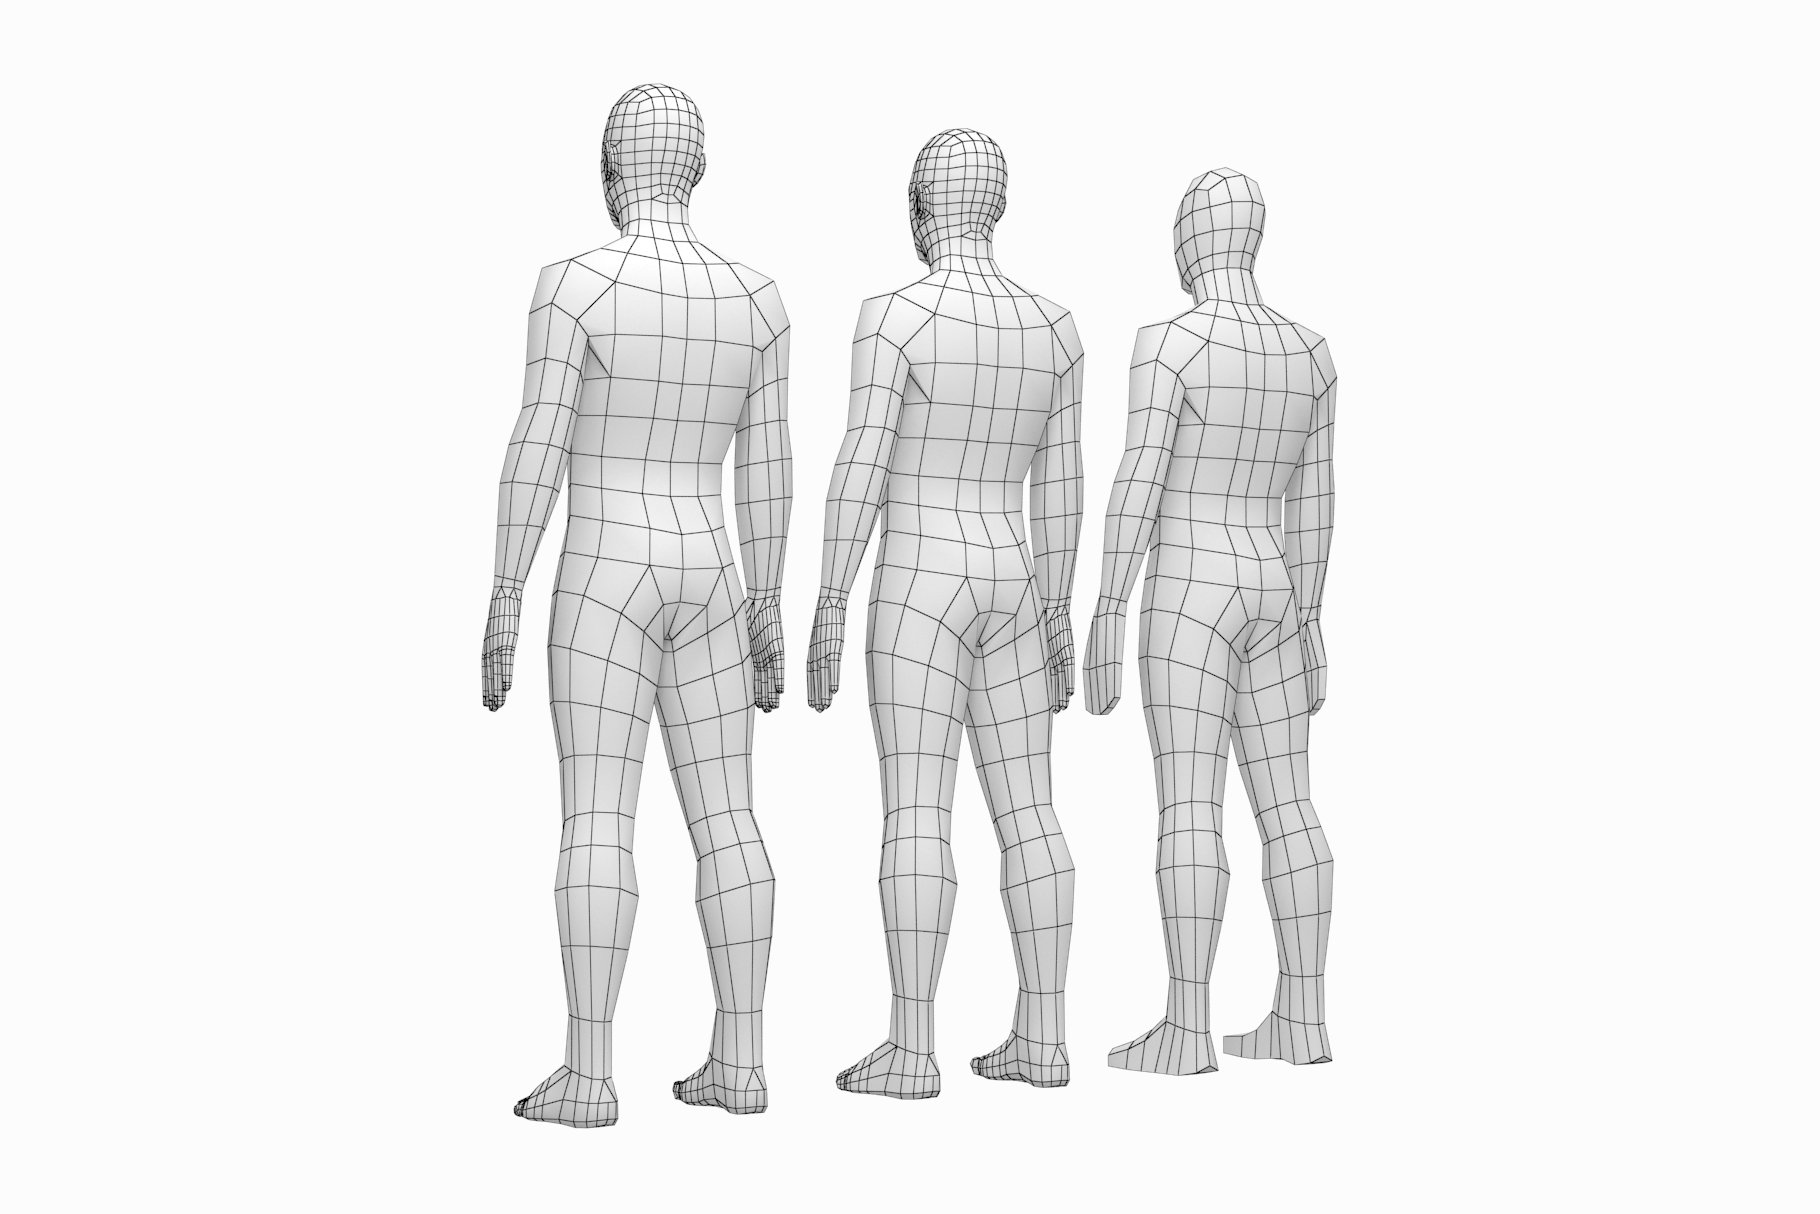 Rendering of an exquisite low poly 3d model of a male body without textures